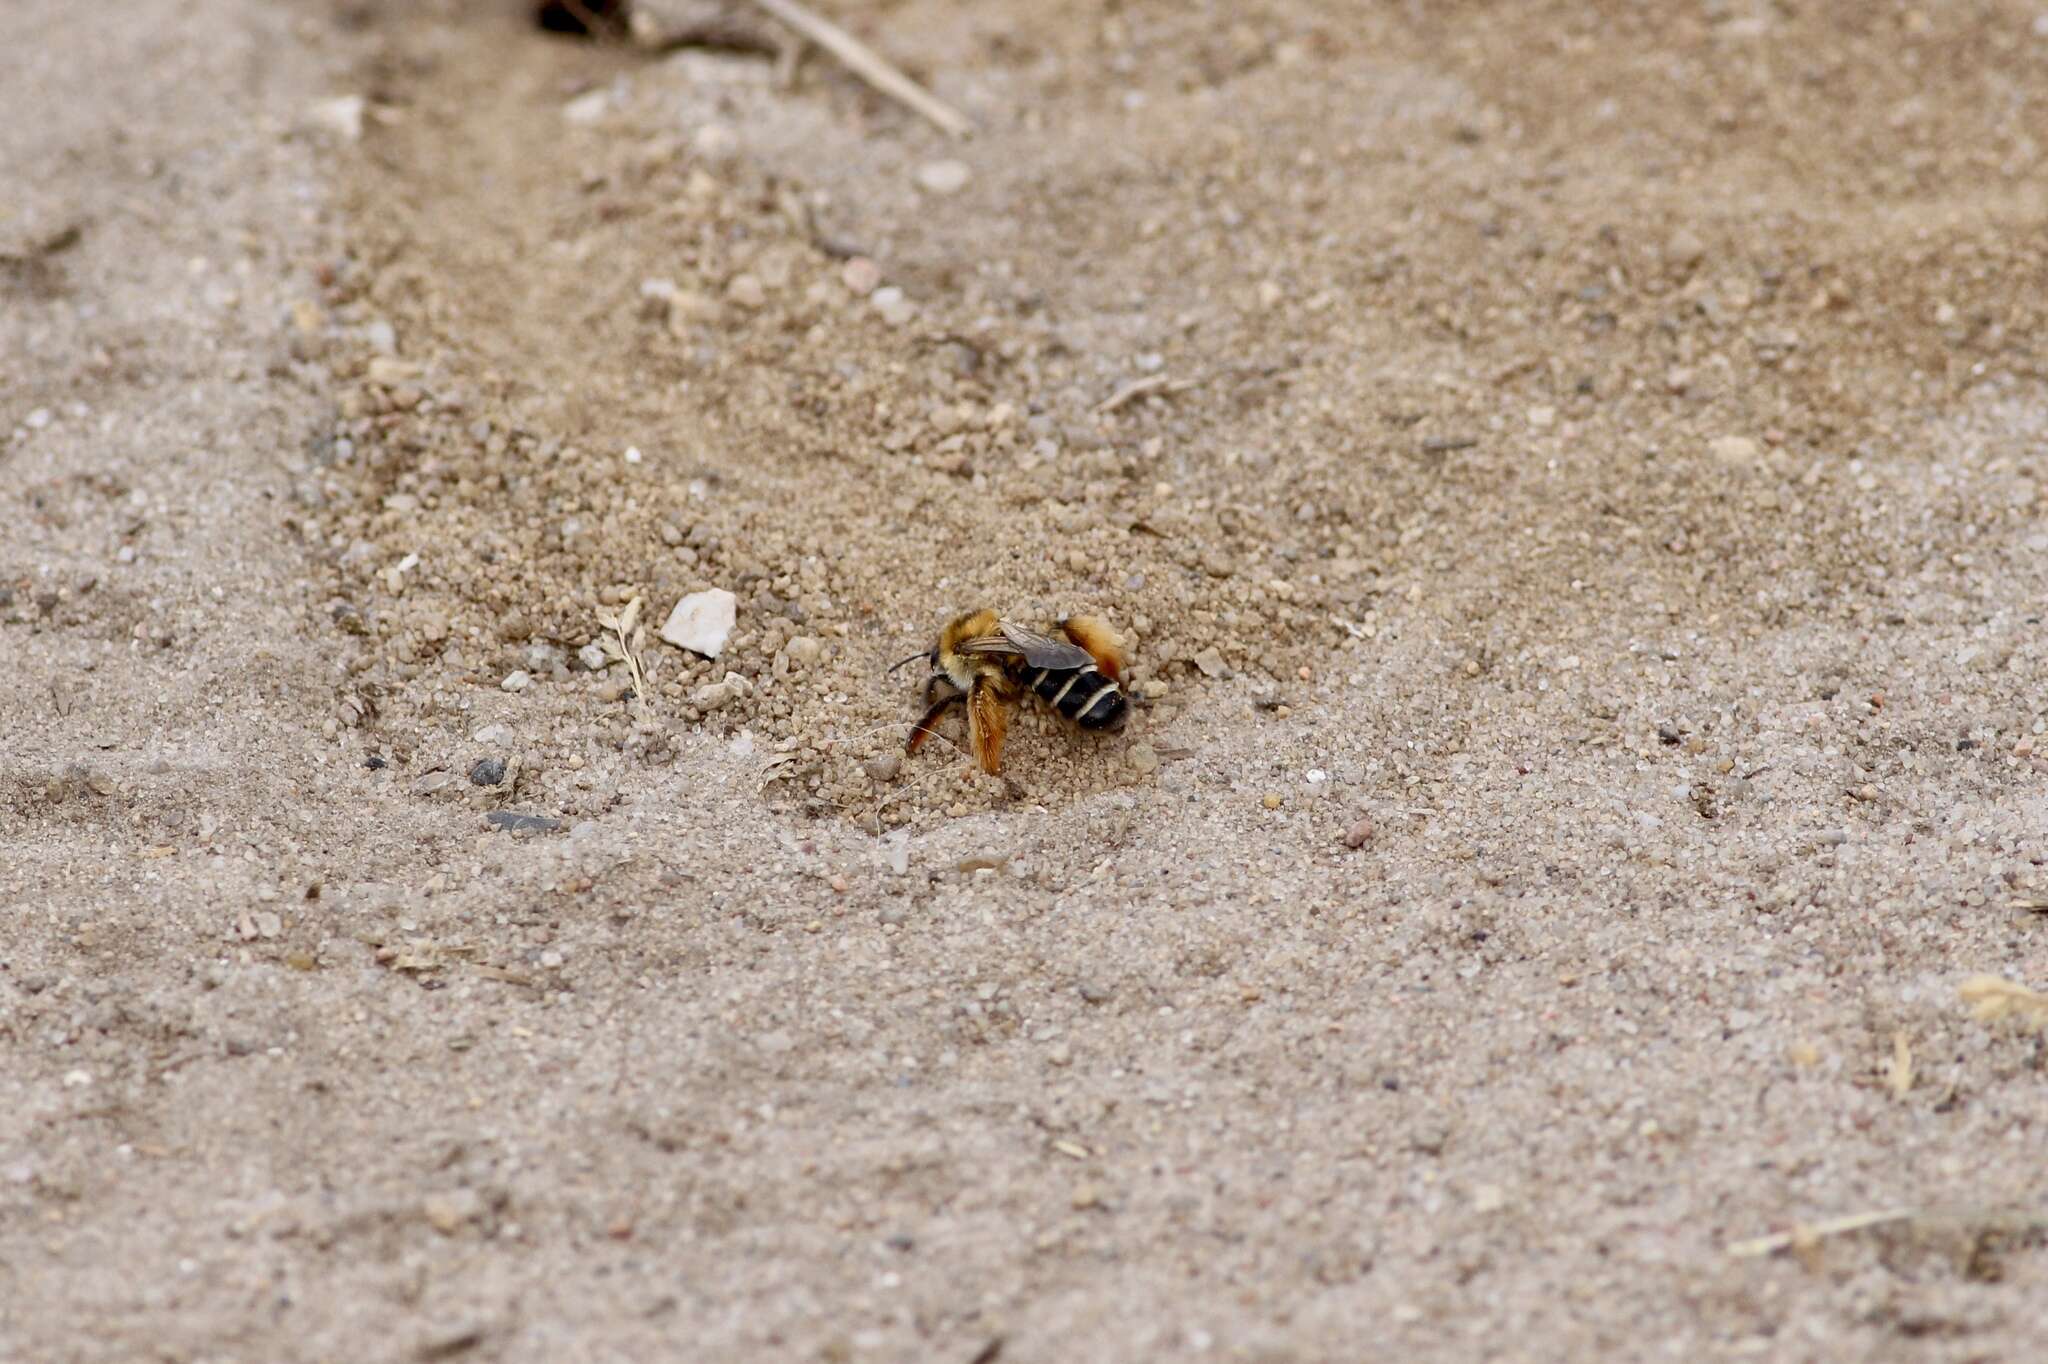 Image of Hairy-footed Bees